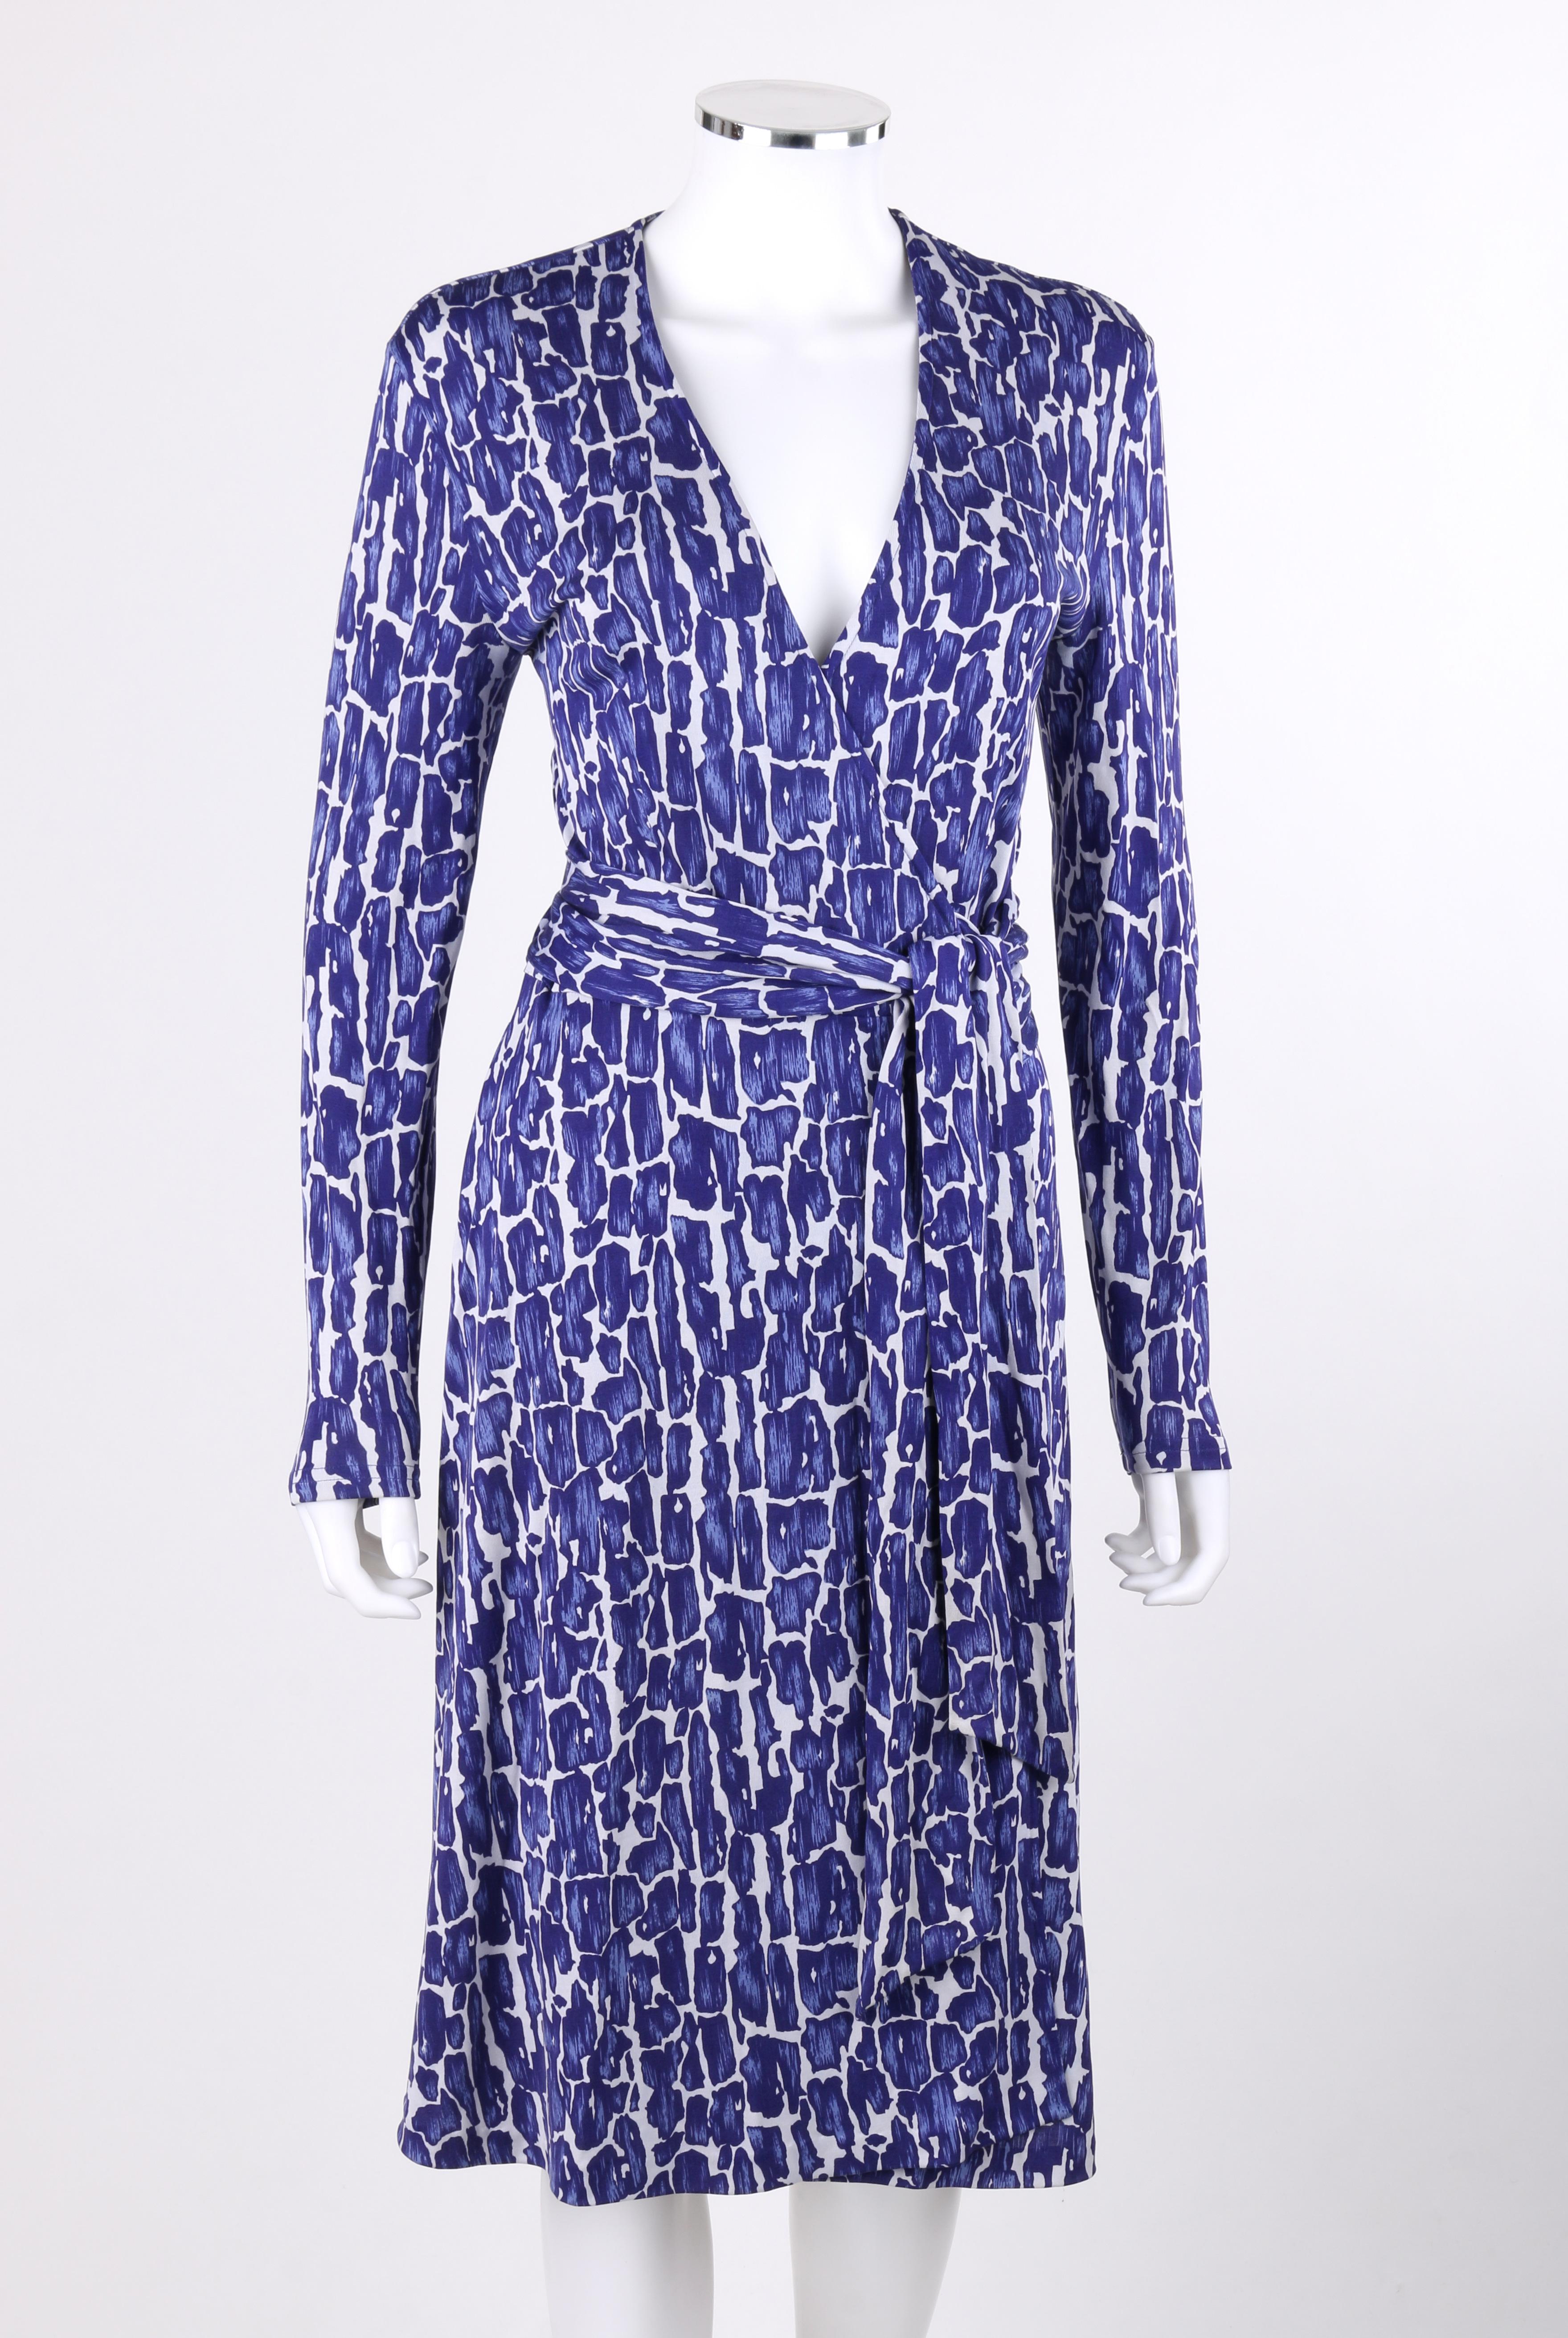 DIANE von FURSTENBERG c.1990's Silk Jersey Abstract Print Blue White Wrap Dress
 
Circa: 1990’s
Label(s): Diane von Furstenberg
Designer: Diane von Furstenberg
Style: Wrap dress
Color(s): Shades of blue and white
Lined: No
Marked Fabric Content: